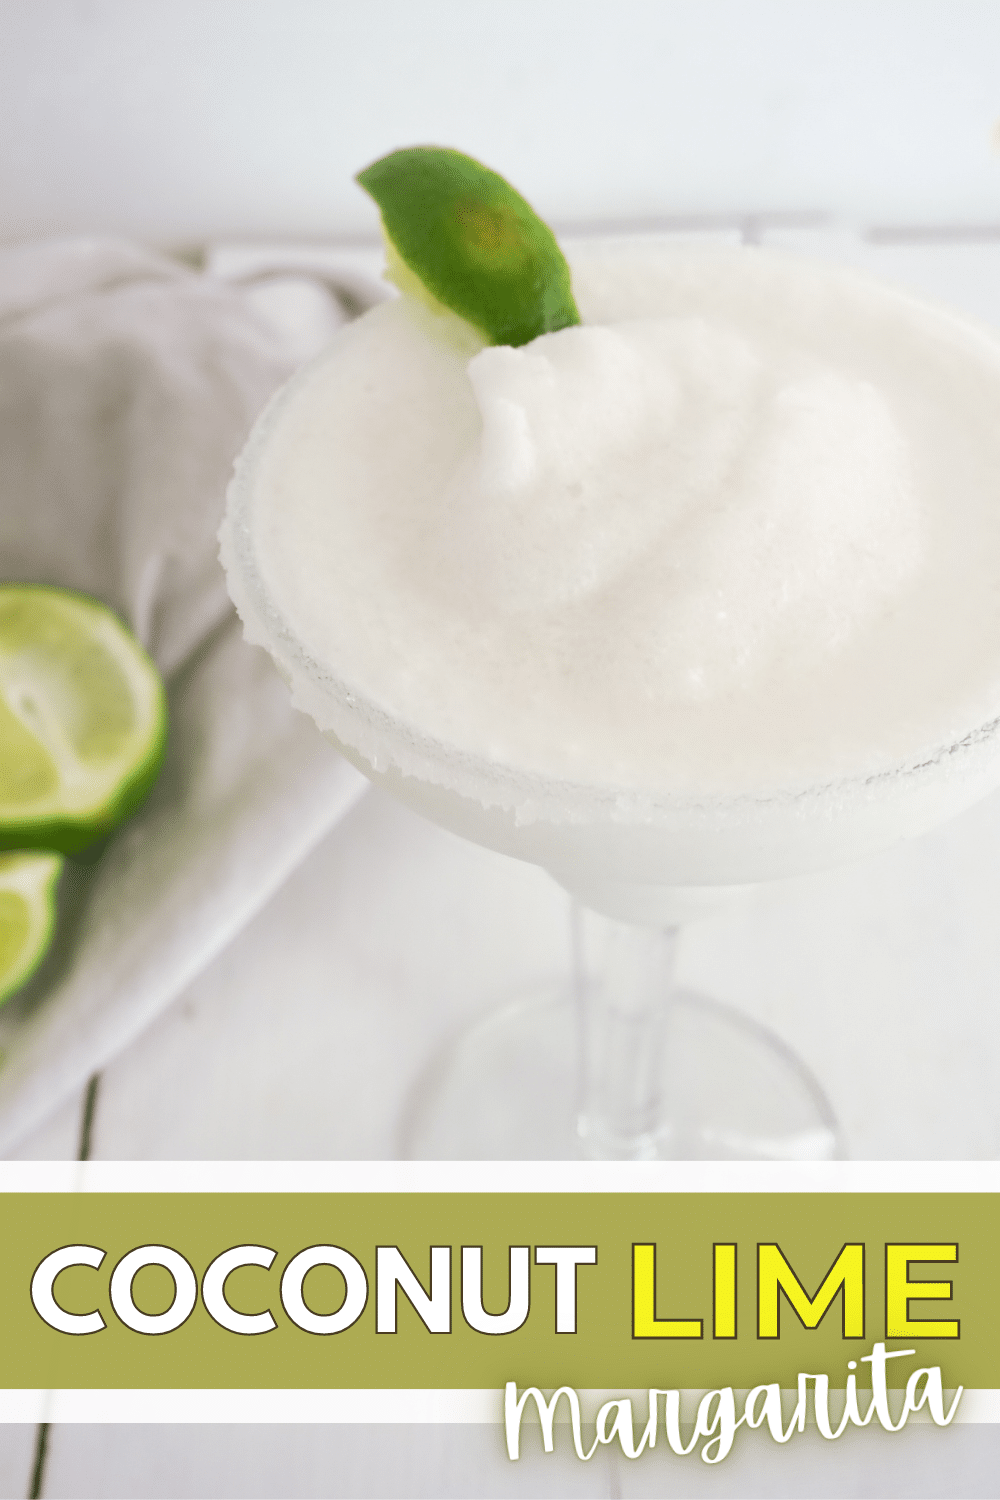 This Coconut Lime Margarita is the perfect Cinco de Mayo drink. It has a unique flavor that is sure to please any crowd. #coconutlimemargarita #coconutmargarita #cocktails #margaritas #coconutmargaritarecipe via @wondermomwannab